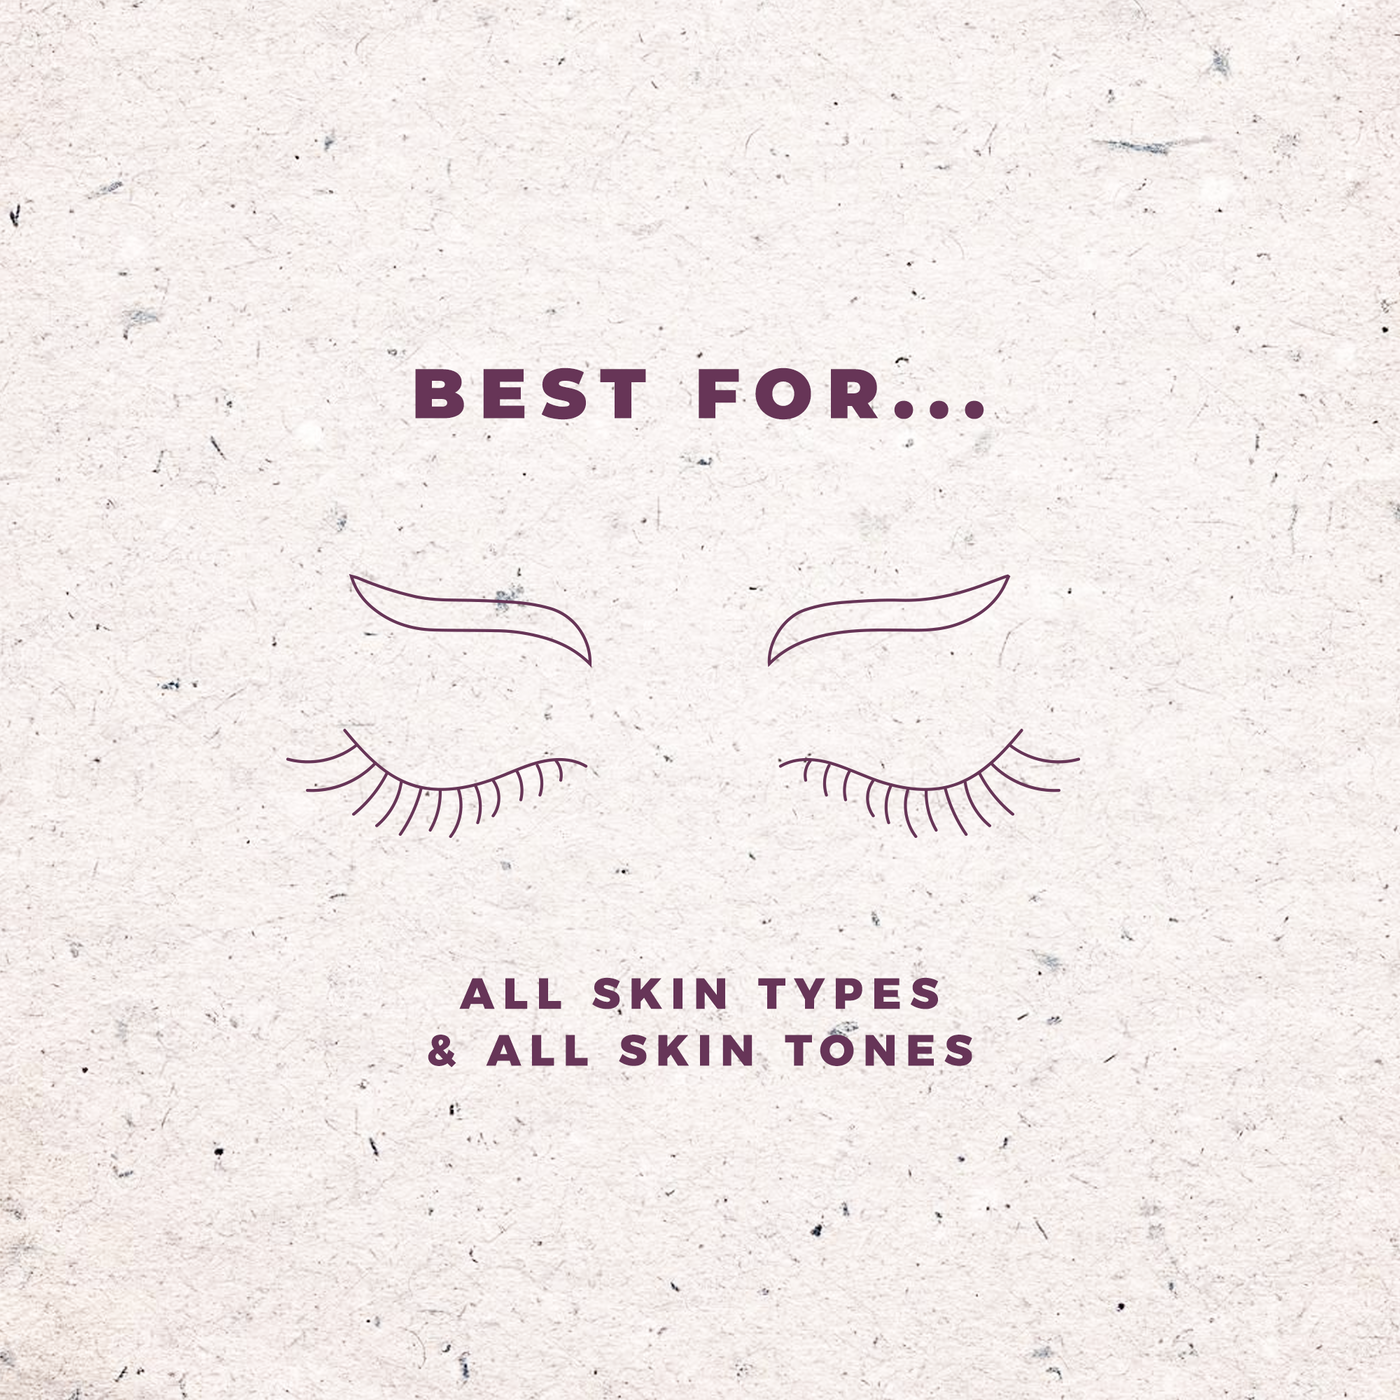 Best for ALL skin types